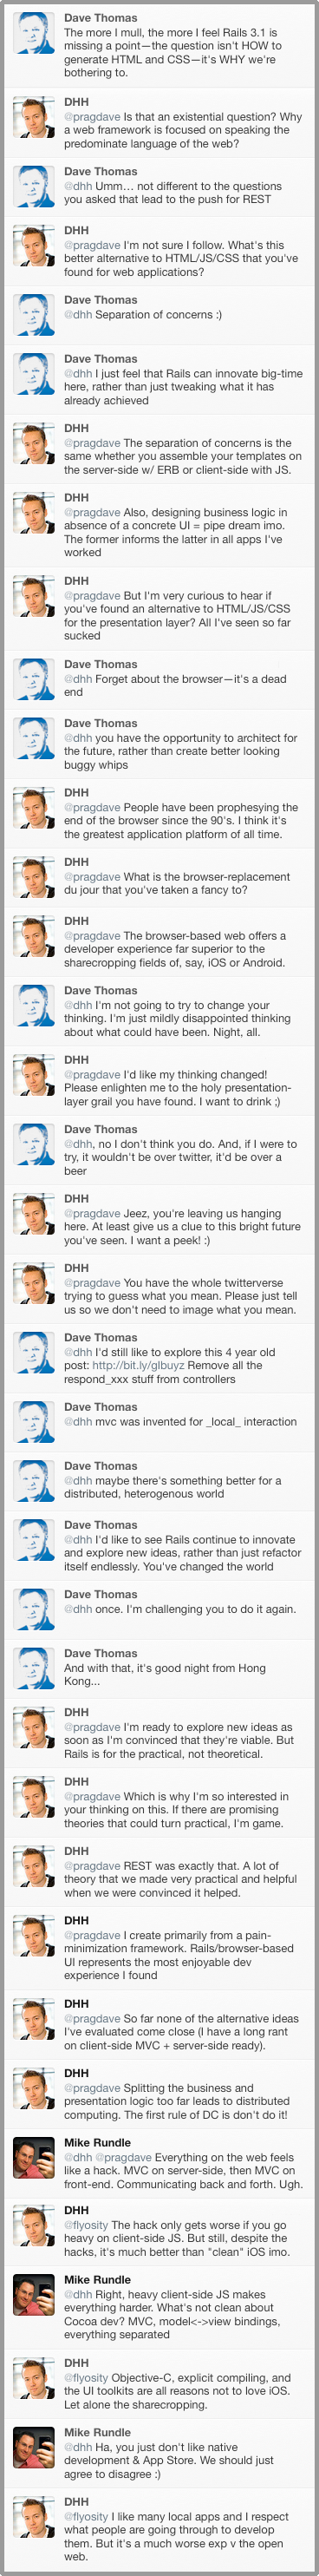 Converstation between DHH And Dave Thomas on Rails 3.1